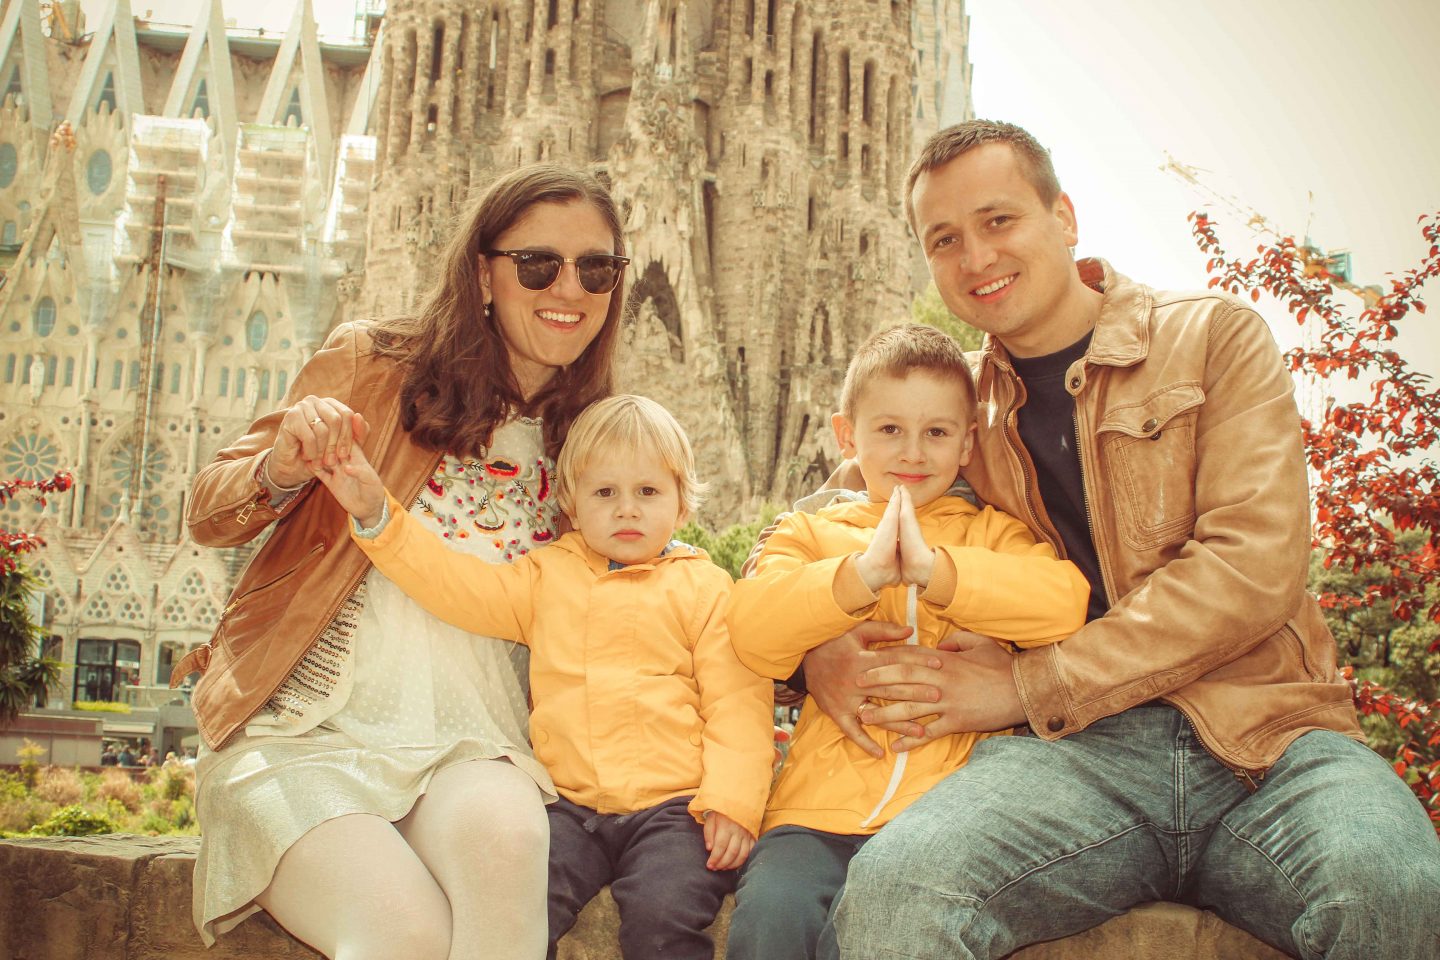 Sagrada Familia. Best time to visit. Where to spend the day with 2 kids.